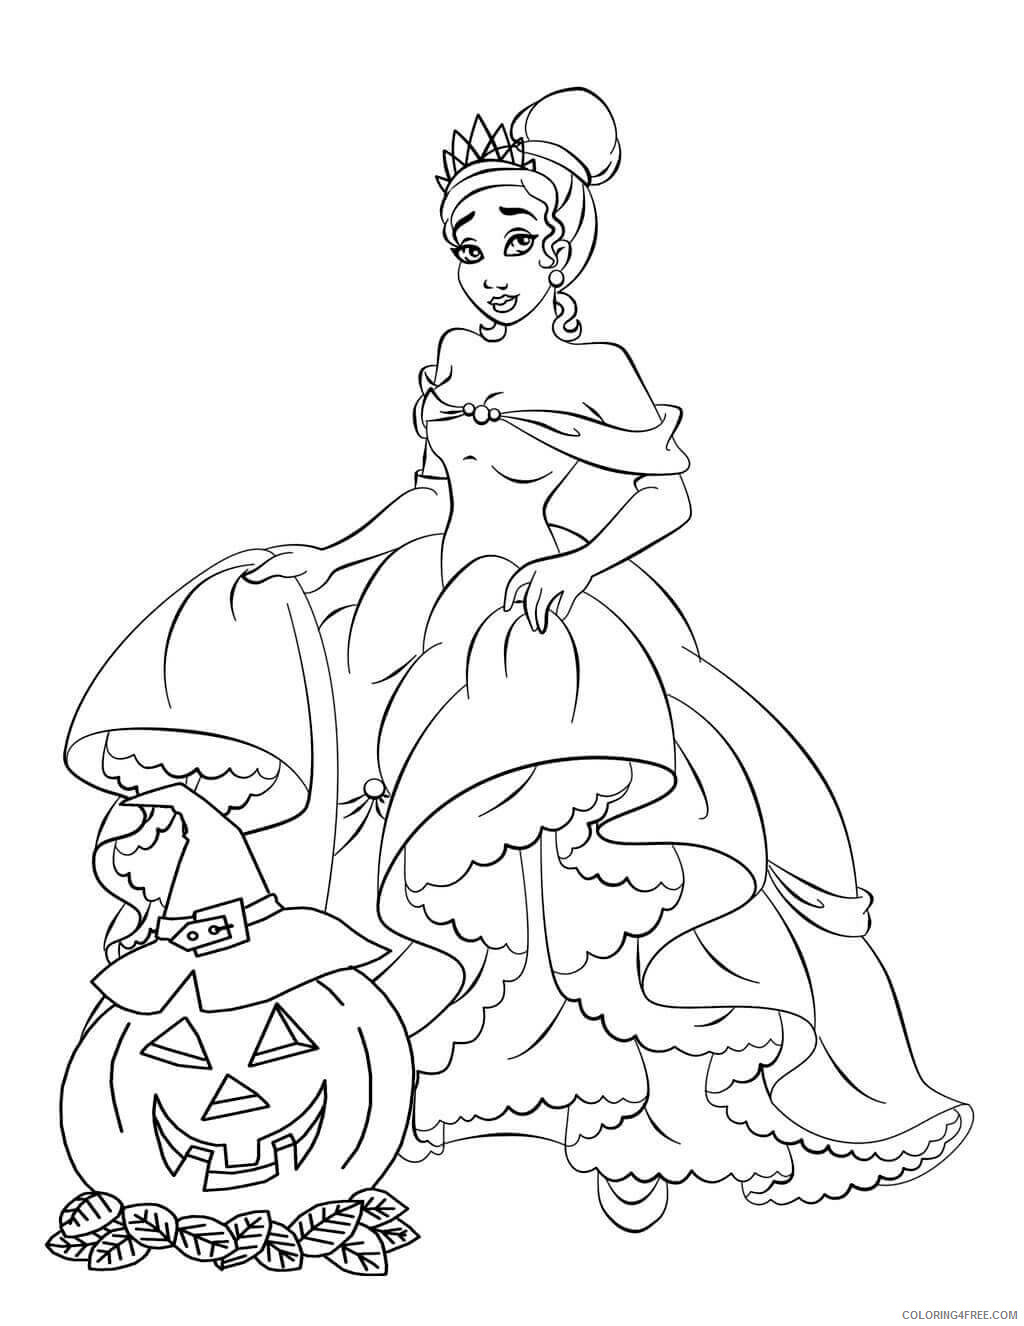 Halloween Coloring Pages Holiday Disney Halloween Printable 2021 0615 Coloring4free